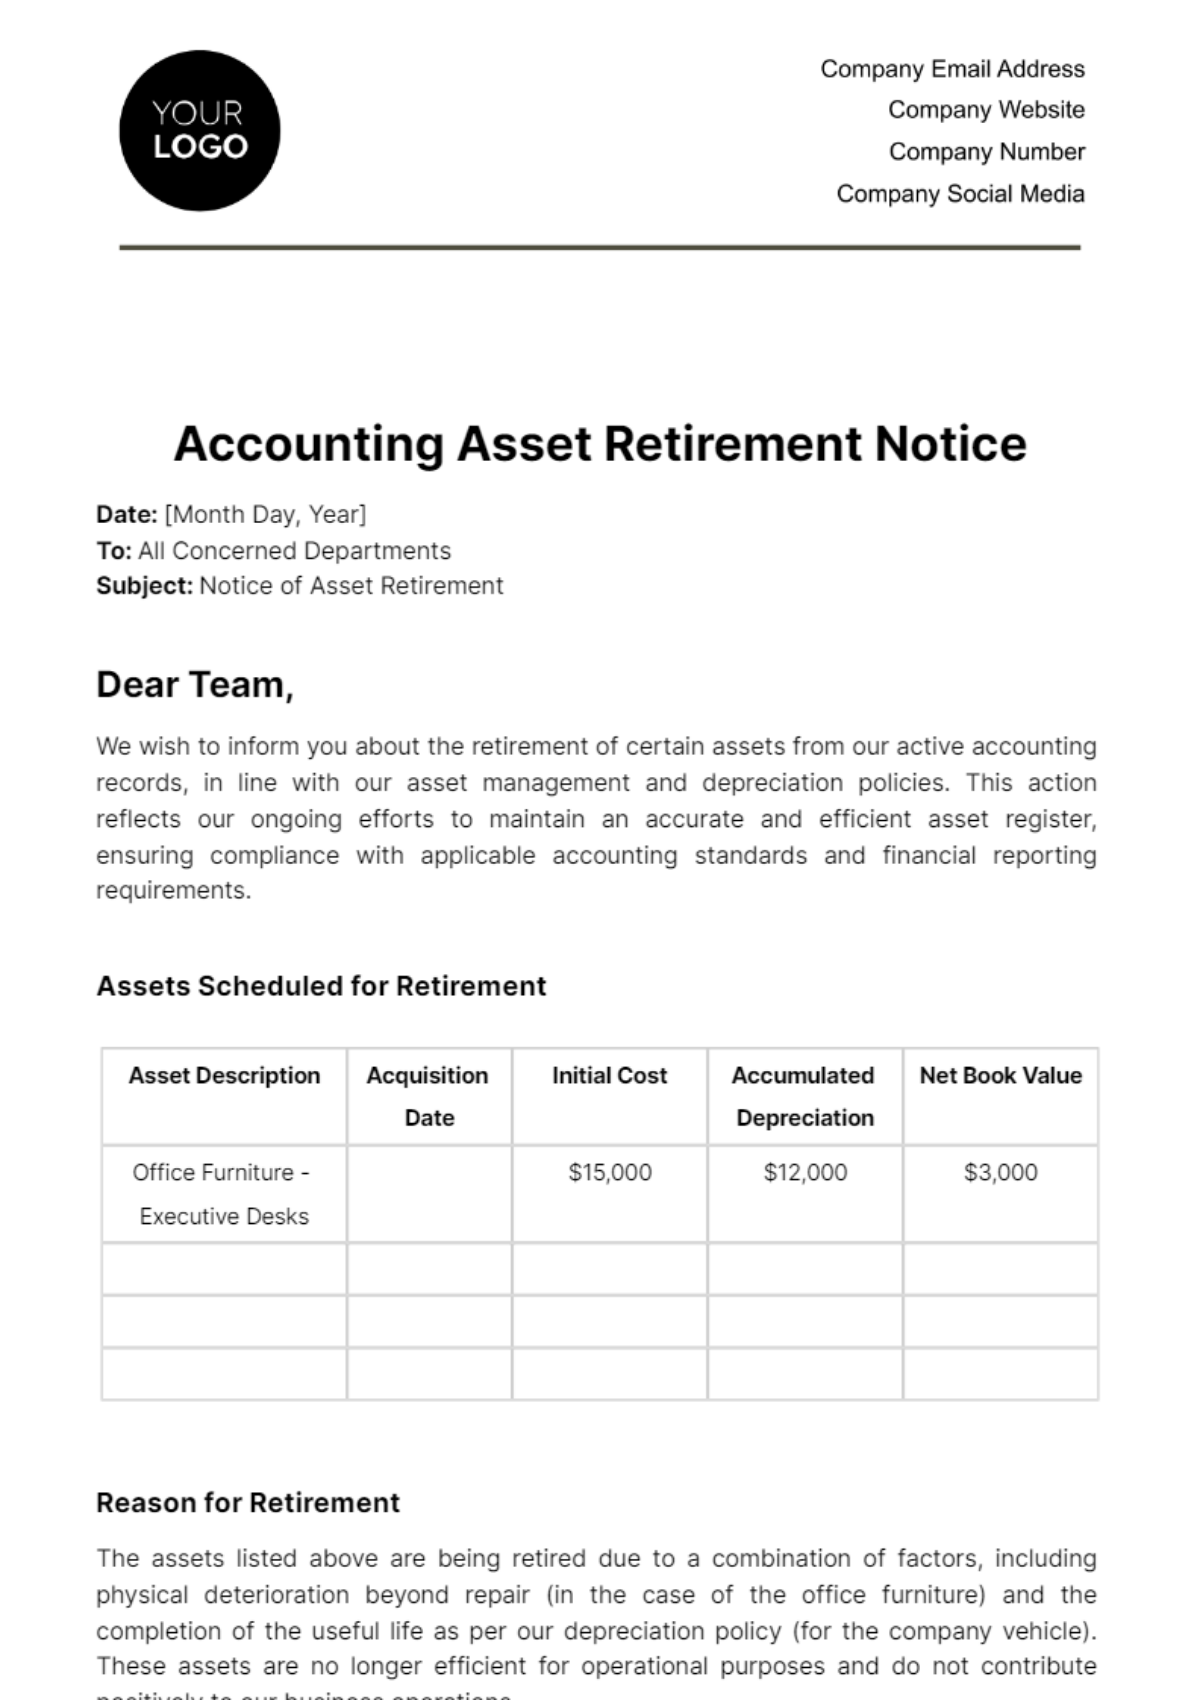 Accounting Asset Retirement Notice Template